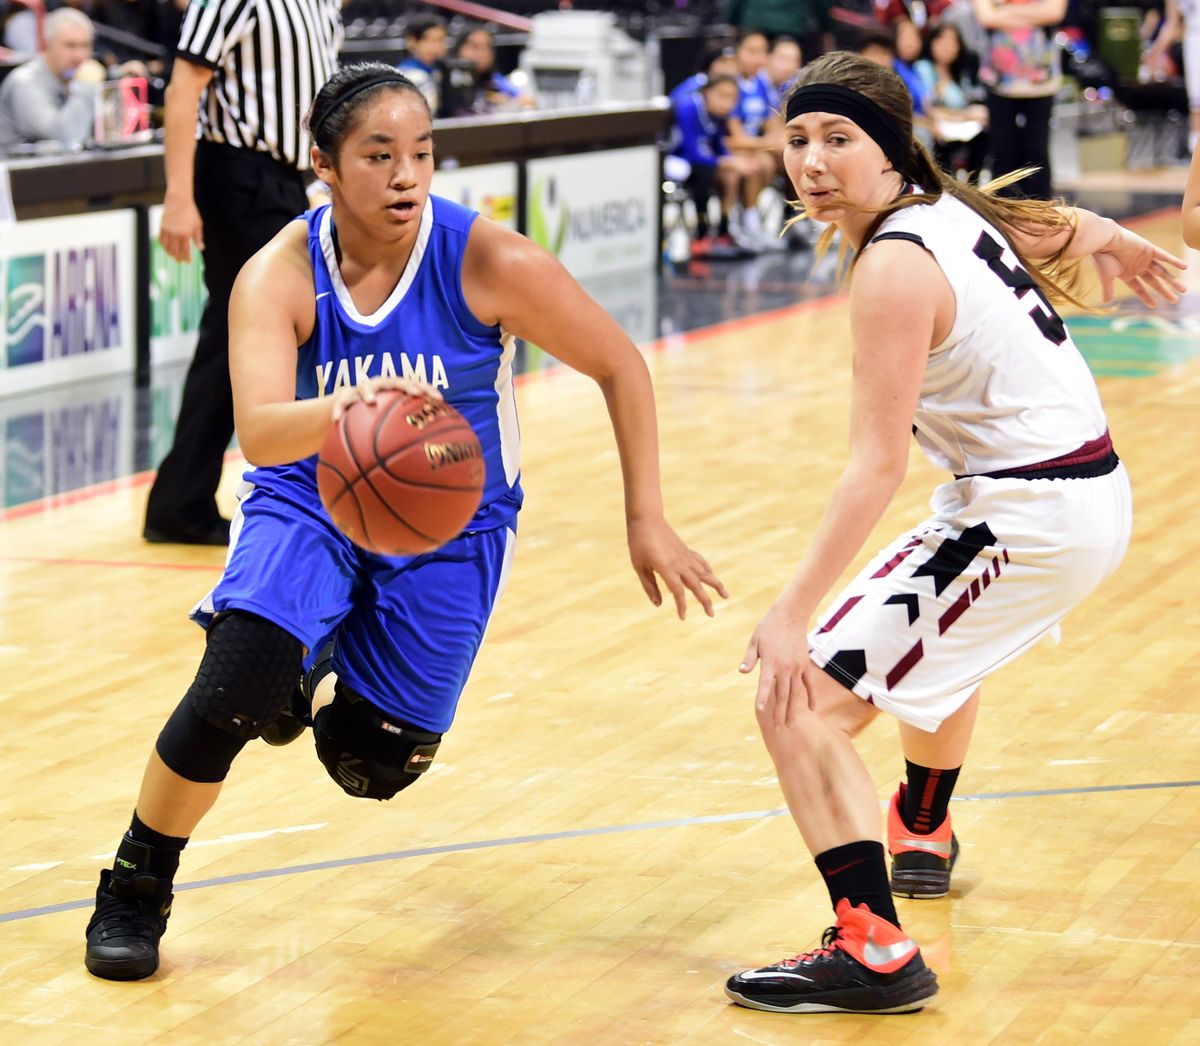 1b Girls Almira Coulee Hartline Vs Yakama Nation Tribal School March 1 March 1 2017 The